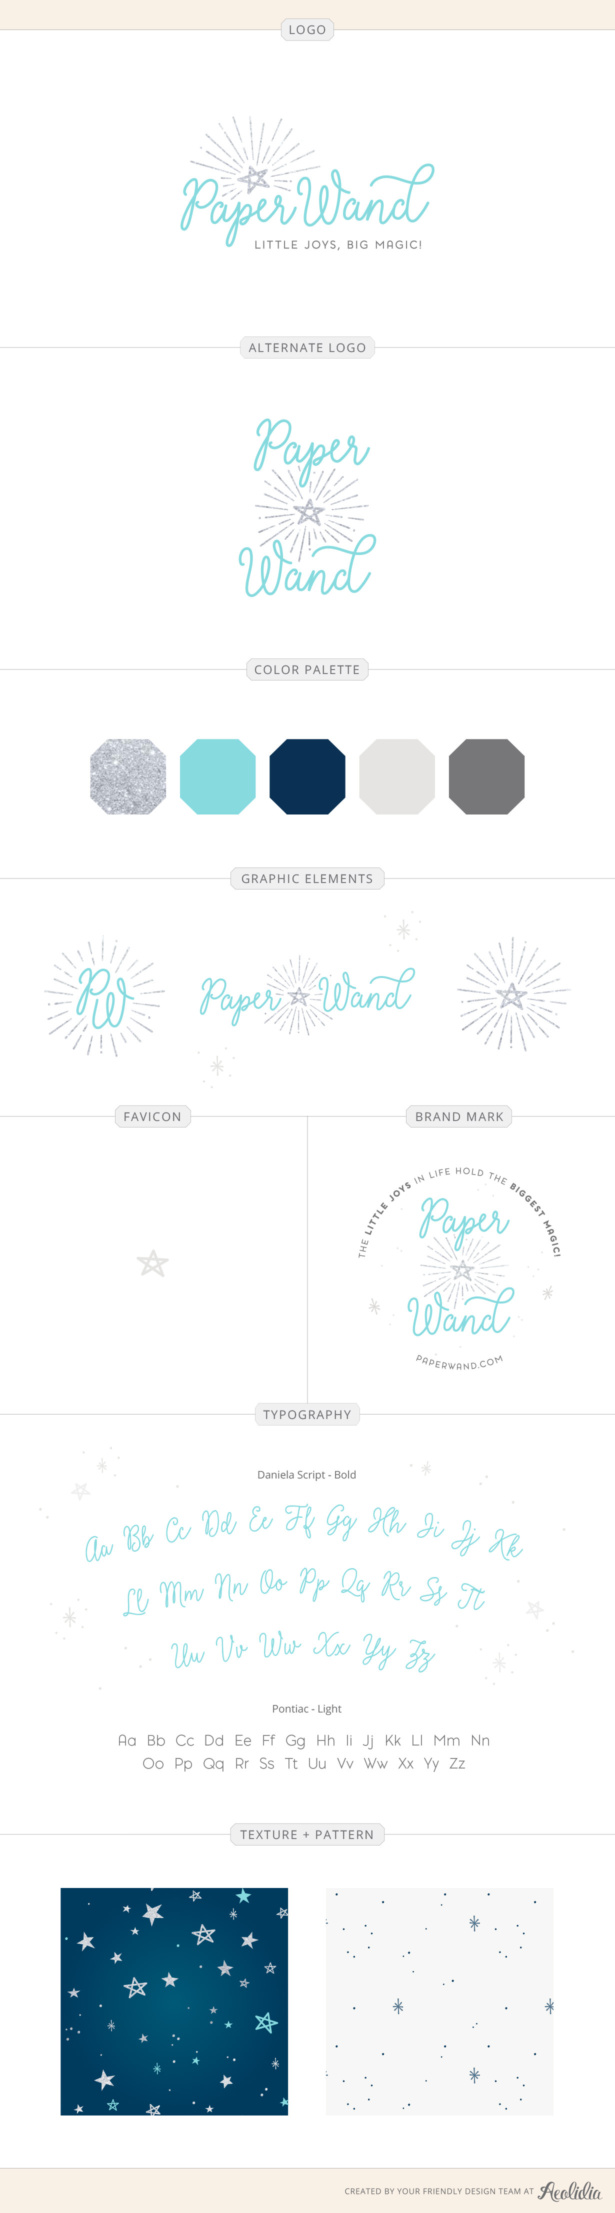 Brand style guide for PaperWand by Aeolidia. Expert branding and logo design can give your business a head start!